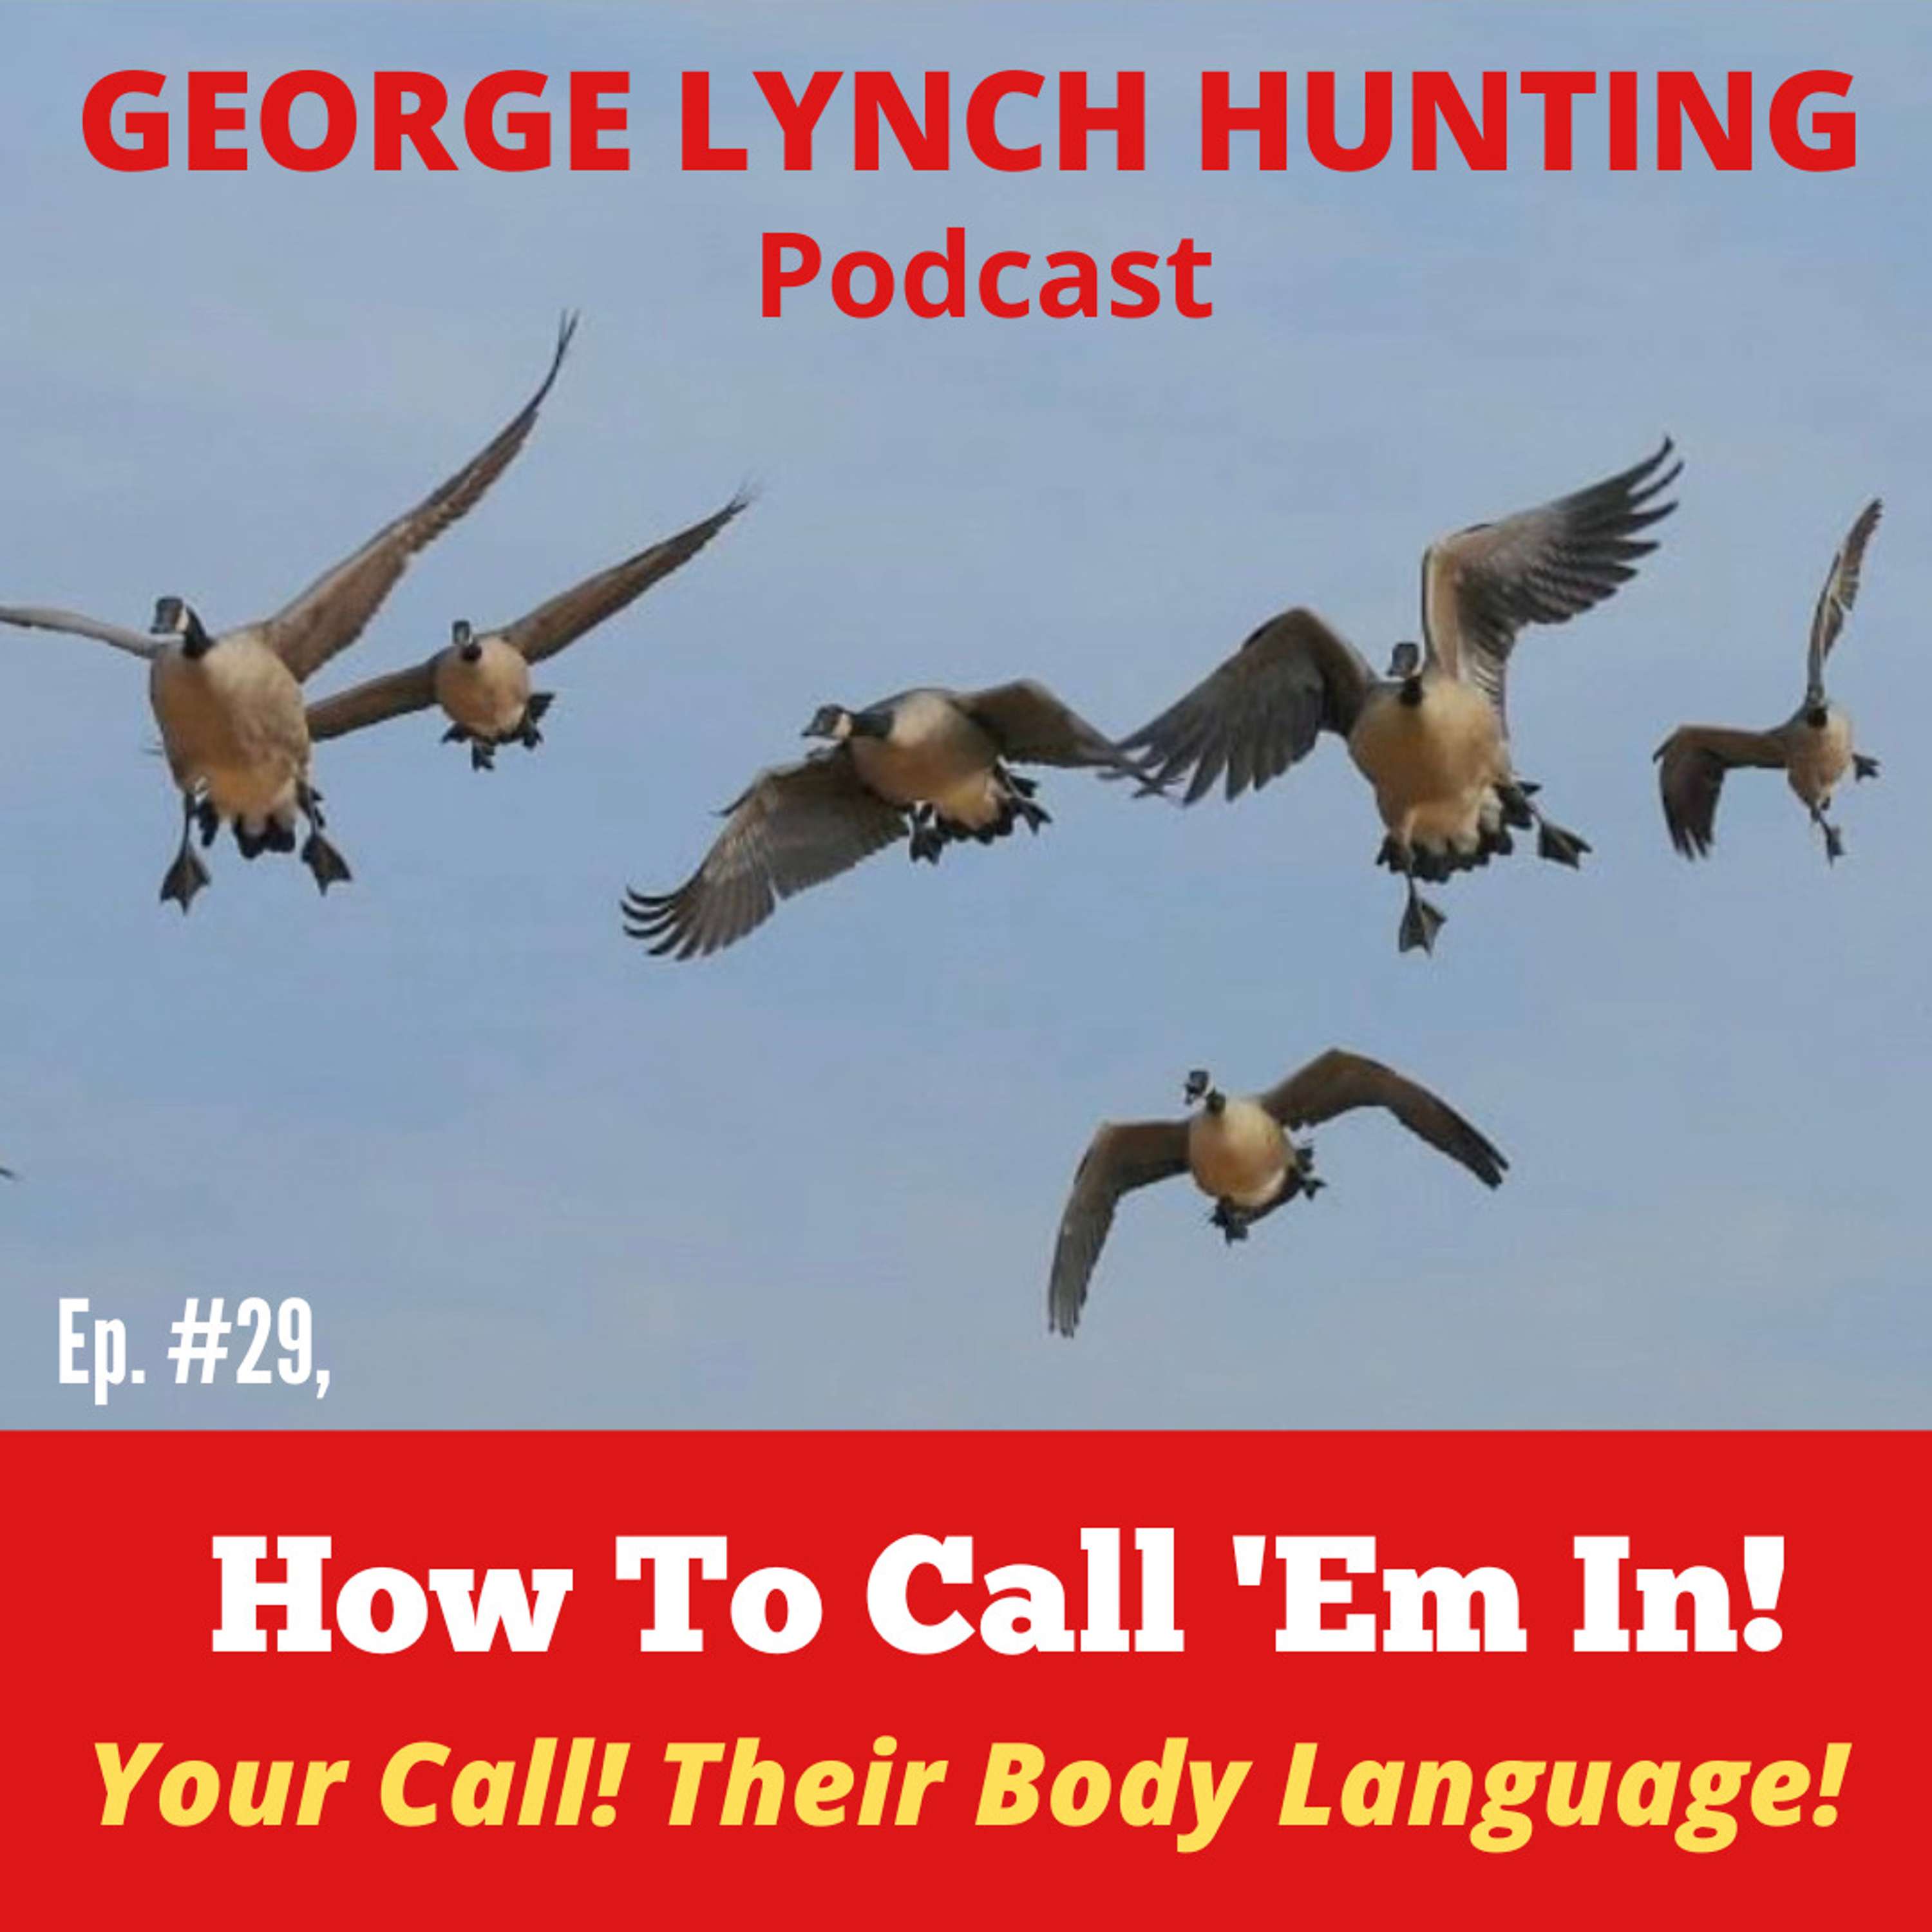 How to Call 'Em In.  YOUR CALL! THEIR BODY LANGUAGE!